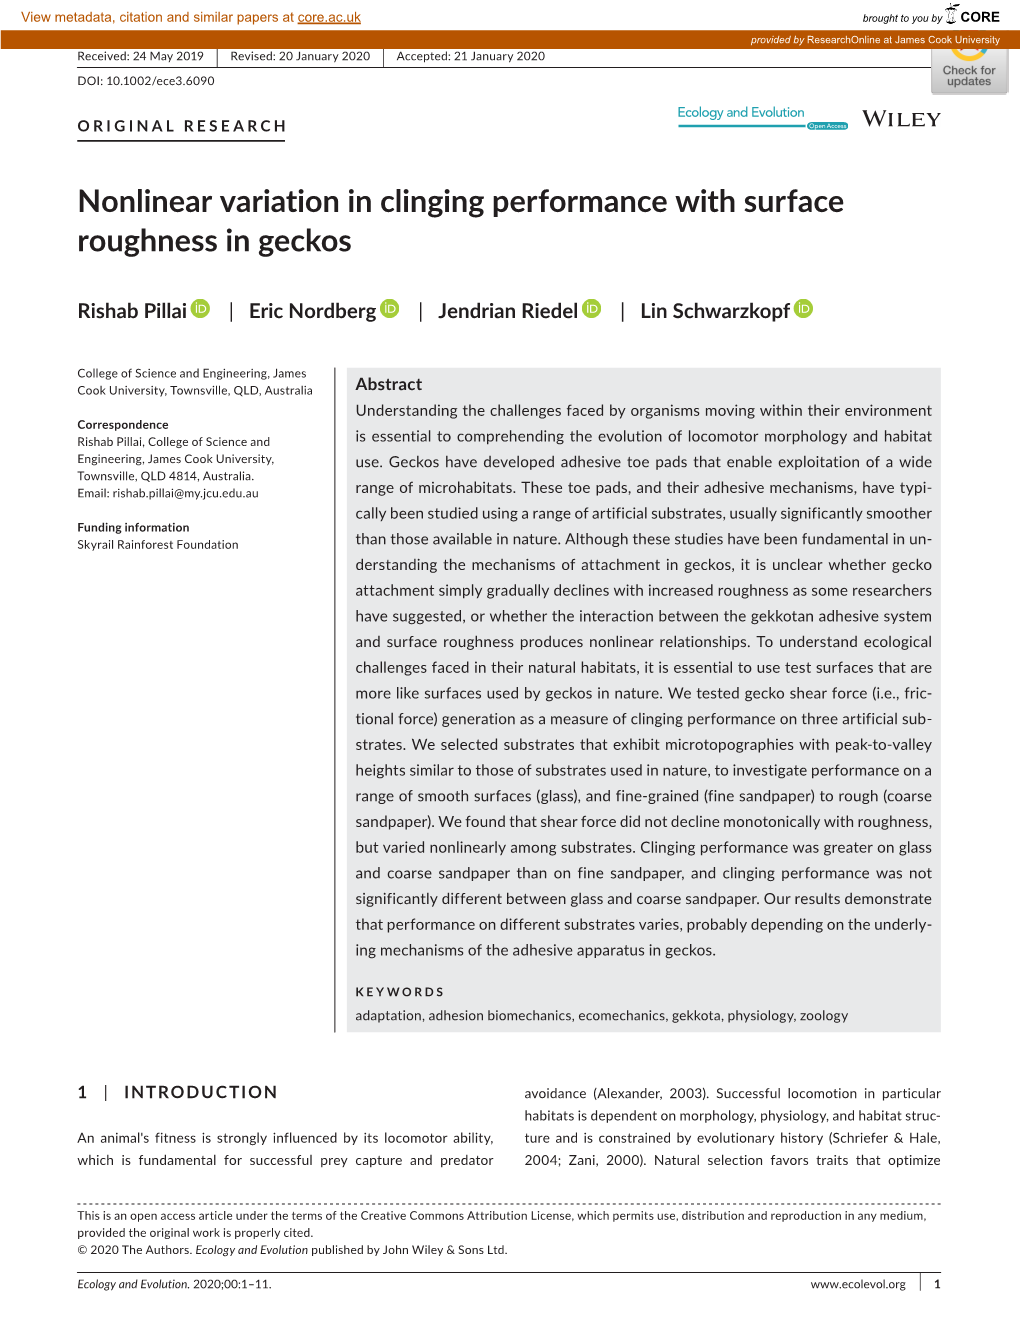 Nonlinear Variation in Clinging Performance with Surface Roughness in Geckos